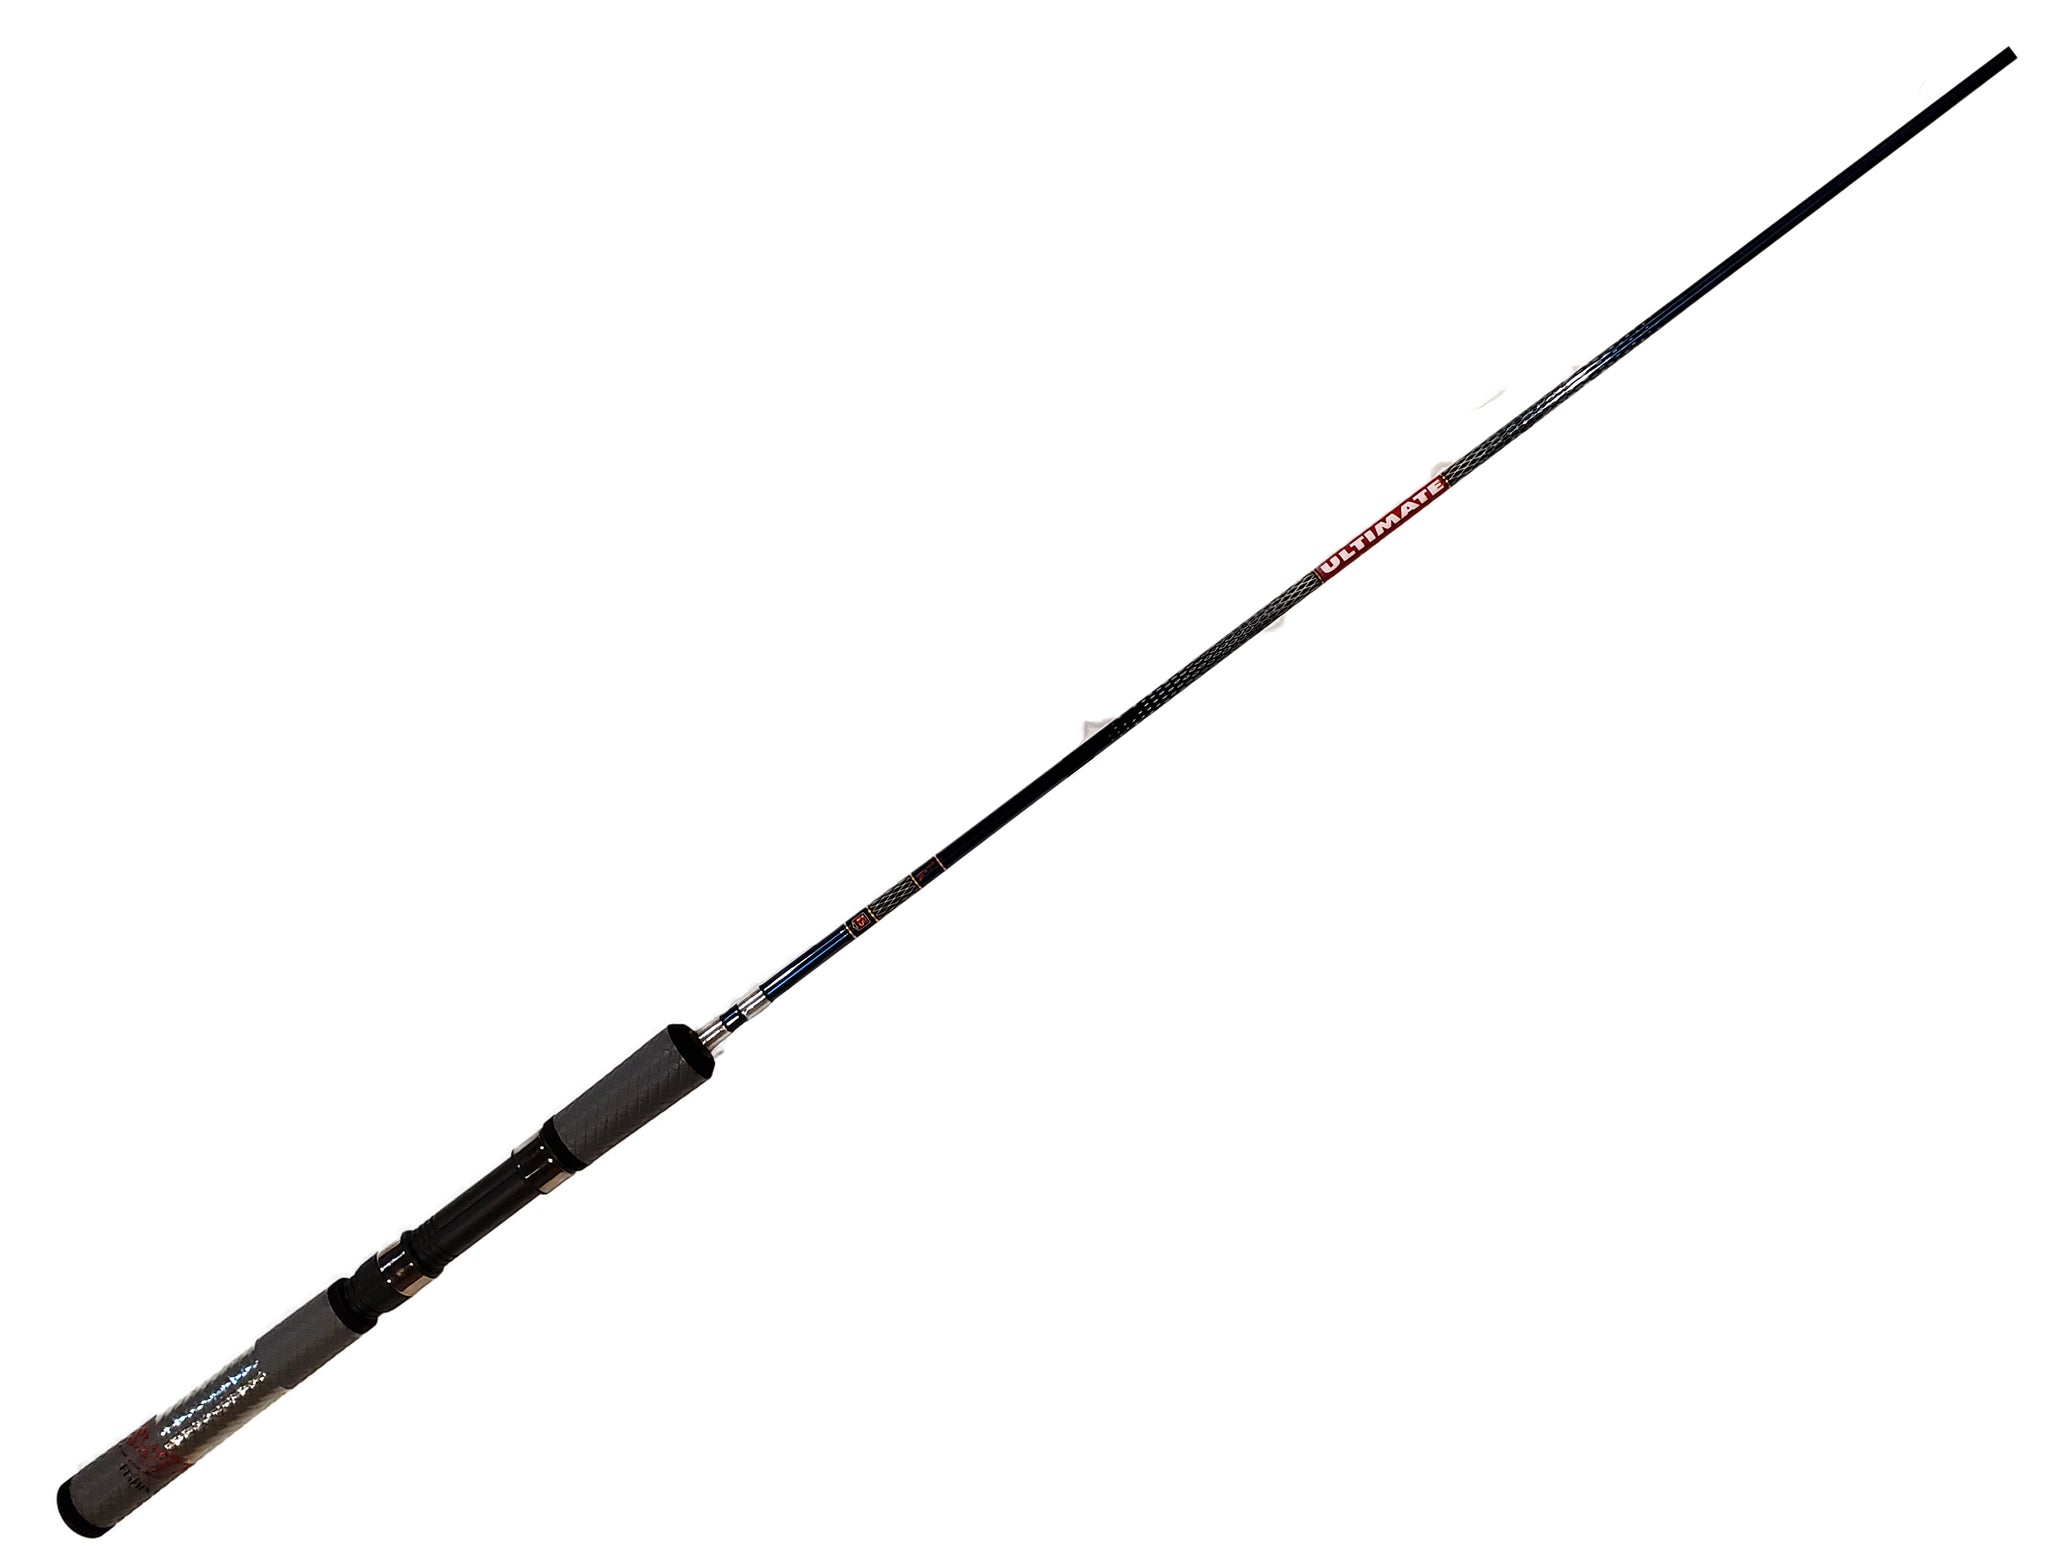 Buck's Ultimate IM6 Graphite Rods - Redesigned - B'n'M Pole Company